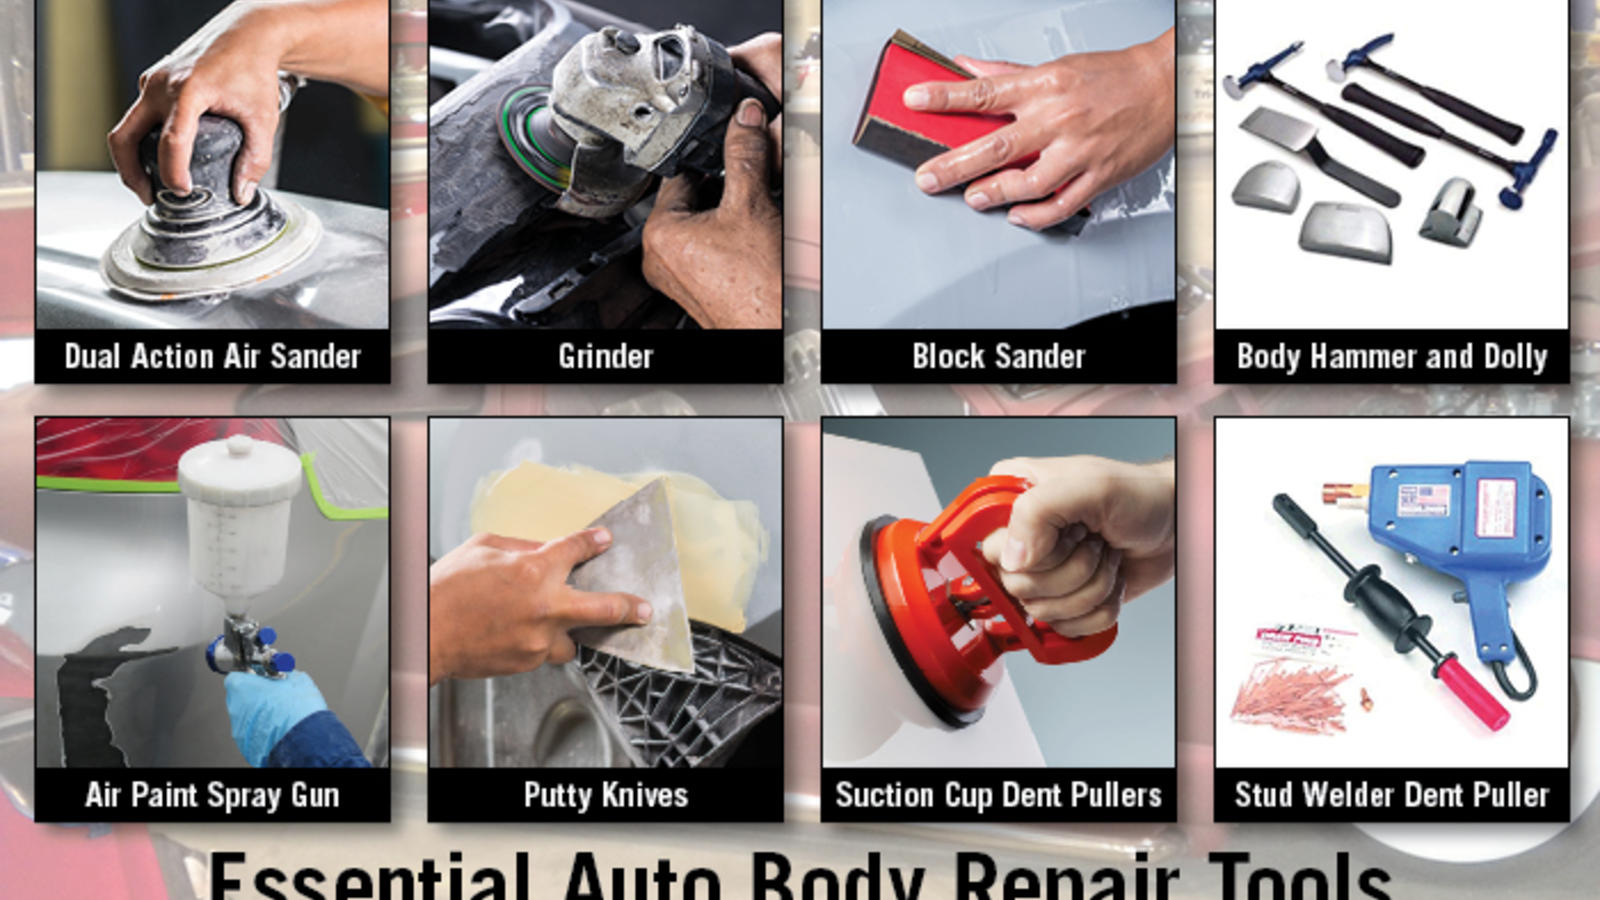 Complete guide for using auto body filler. auto body, auto paint 